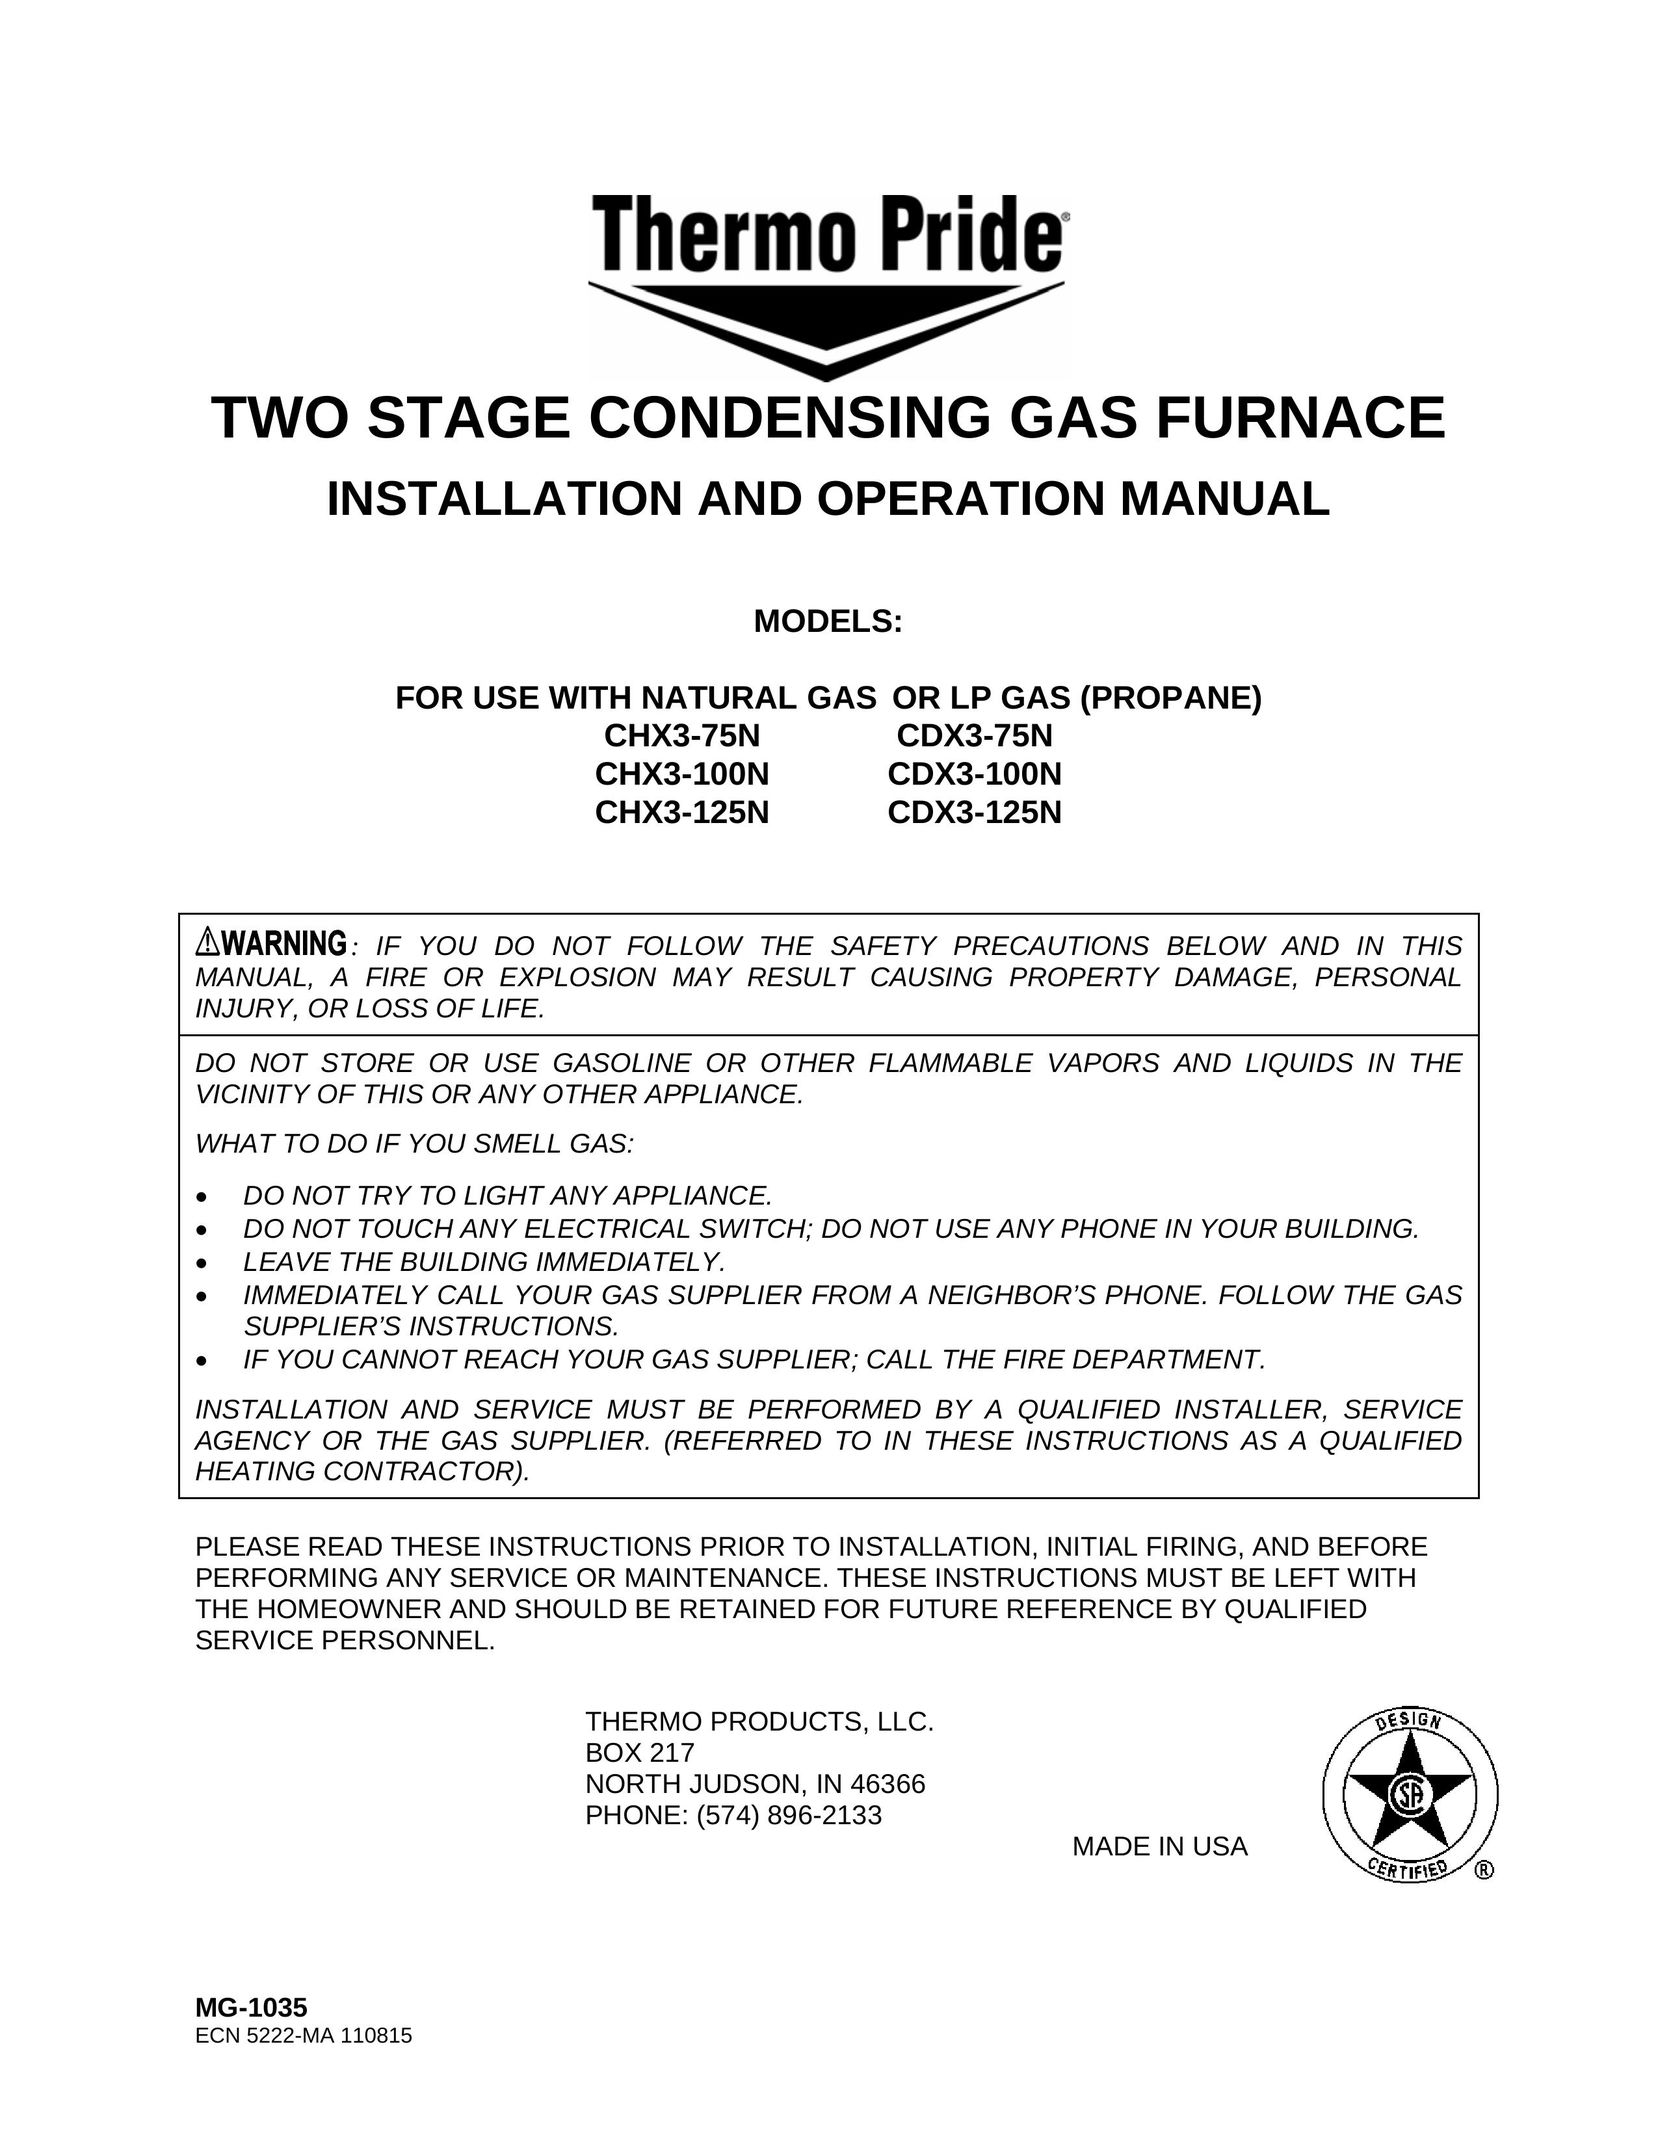 Thermo Products 125n Burner User Manual